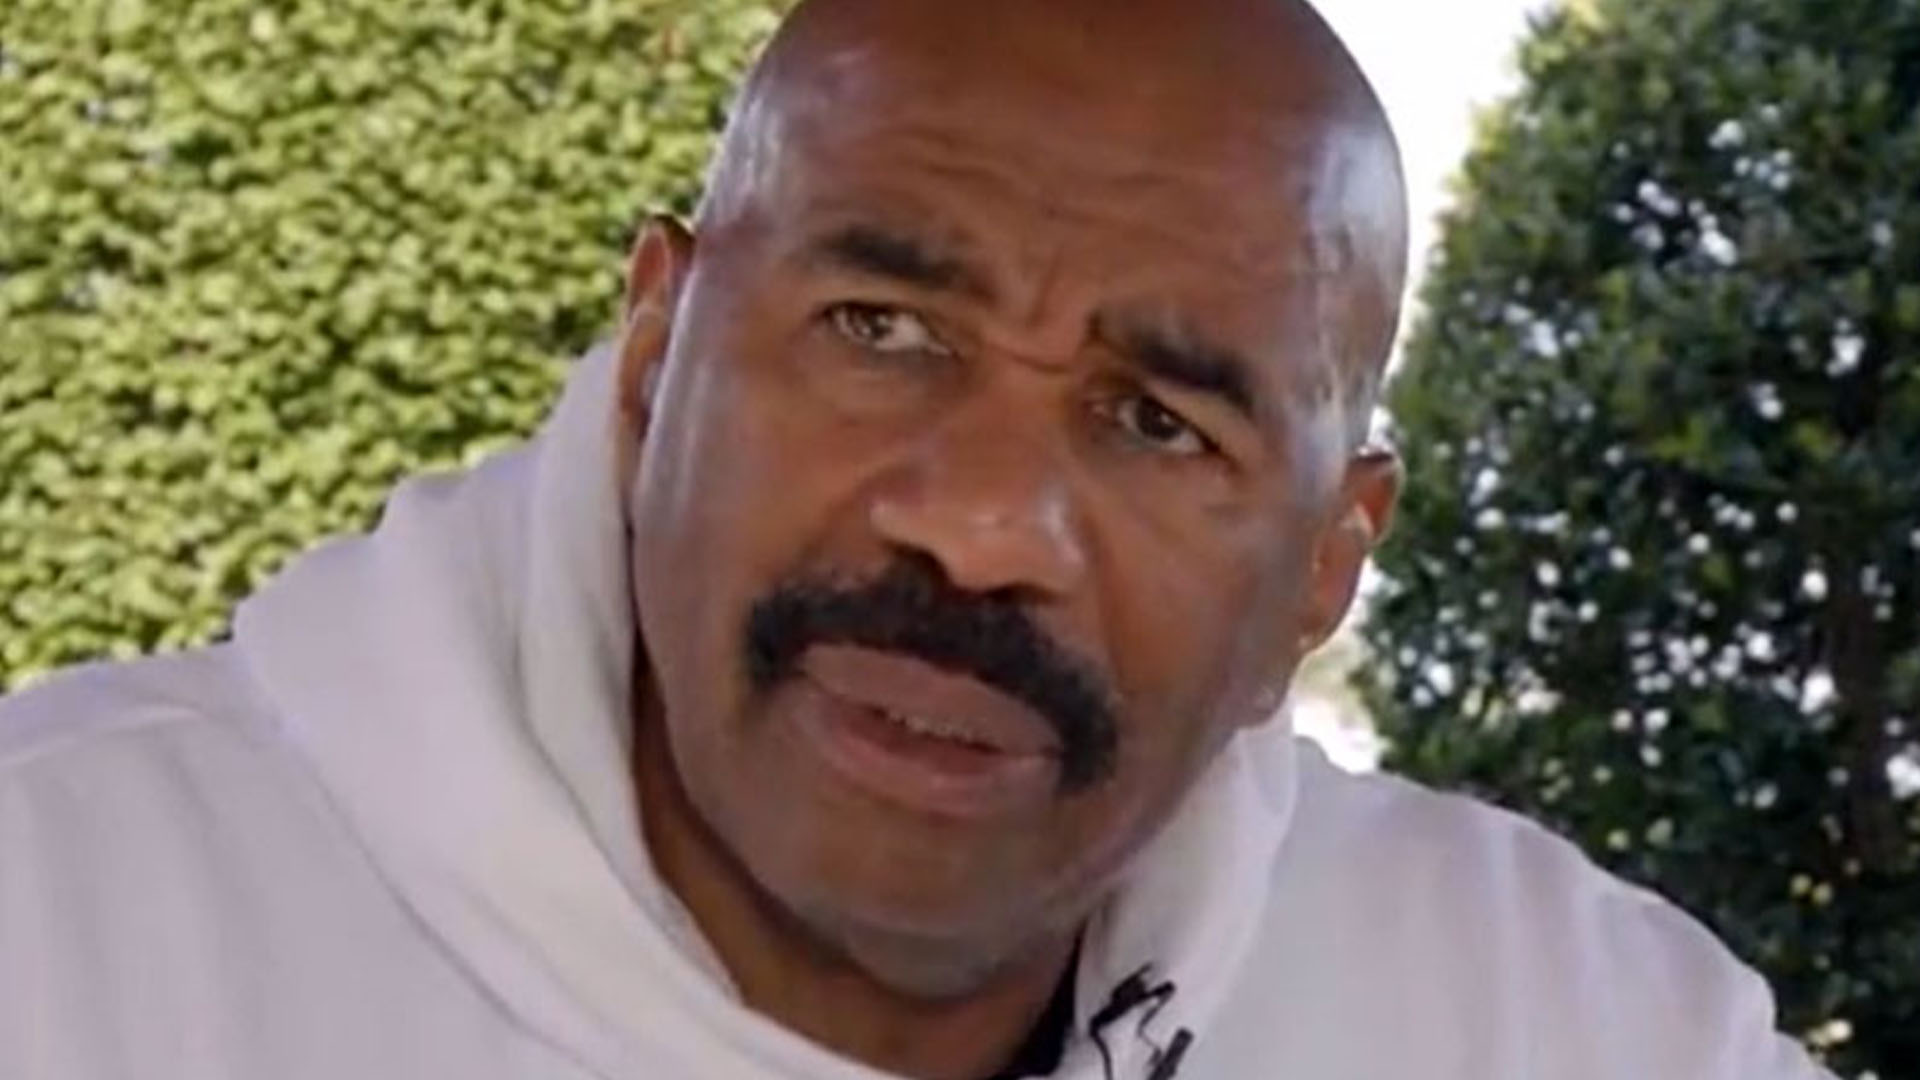 Family Feud host Steve Harvey reveals lifestyle change and shares videos from the gym after weight loss journey